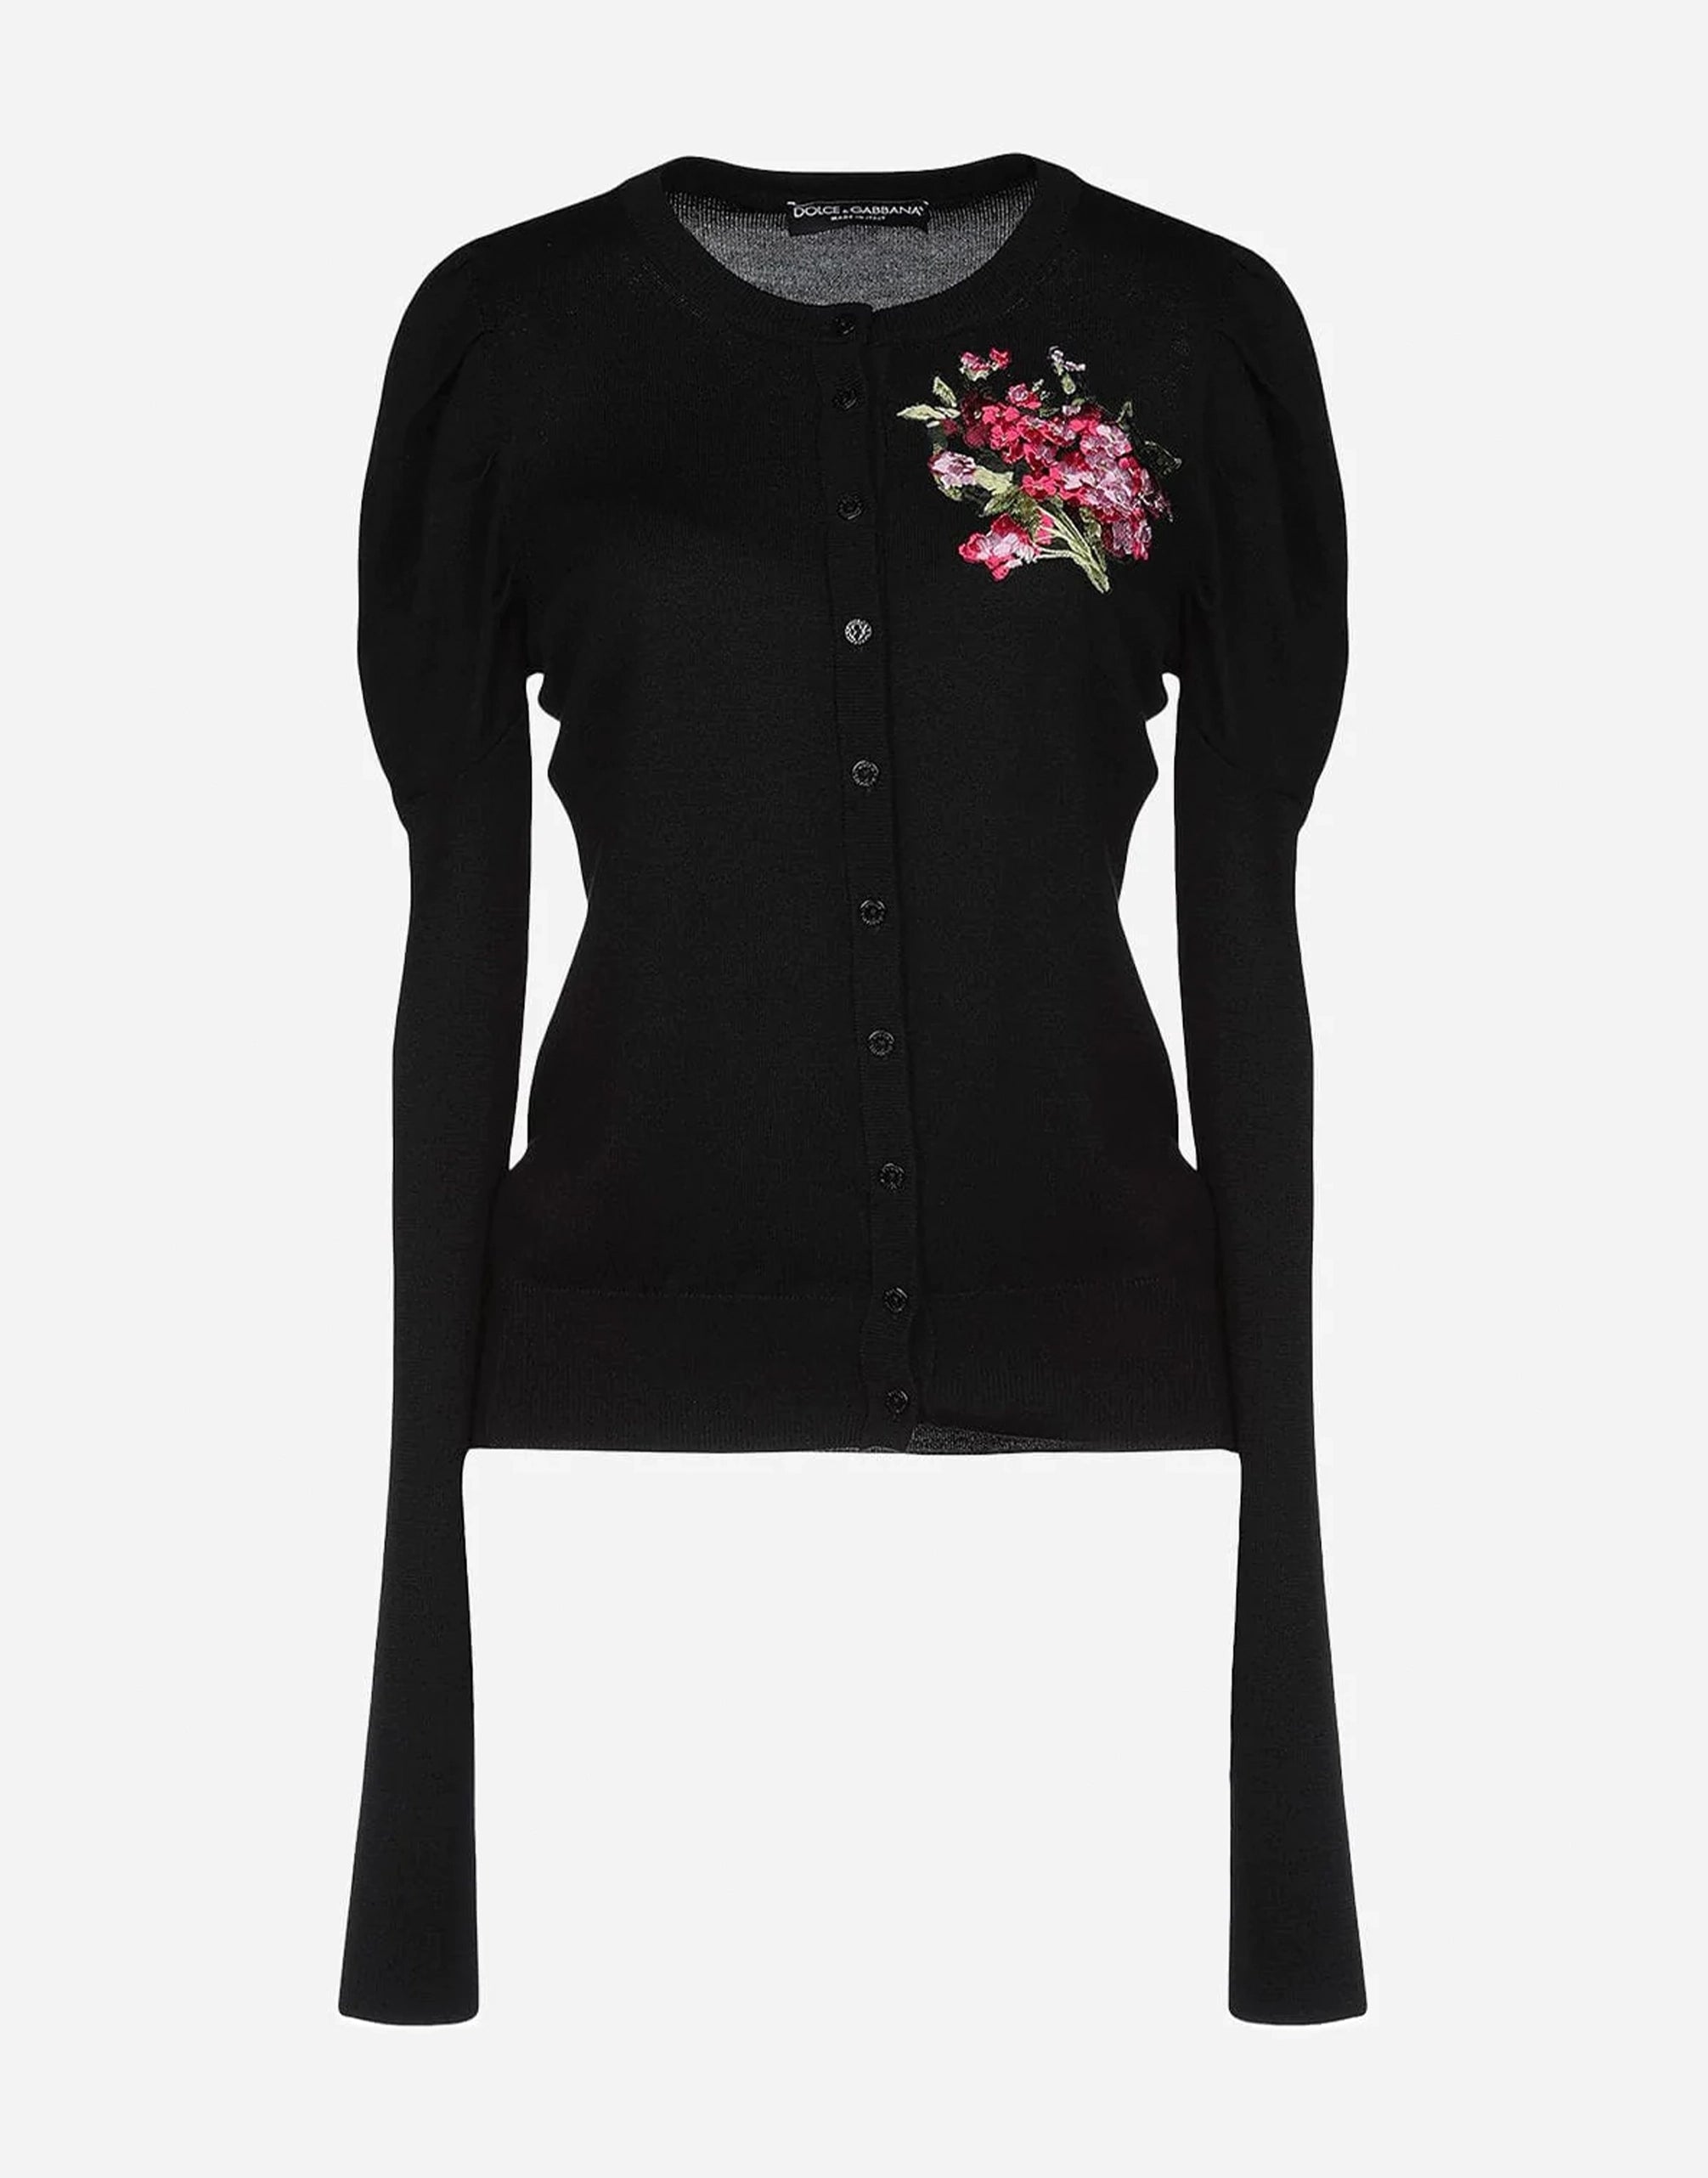 Dolce & Gabbana Floral-Embroidered Cardigan